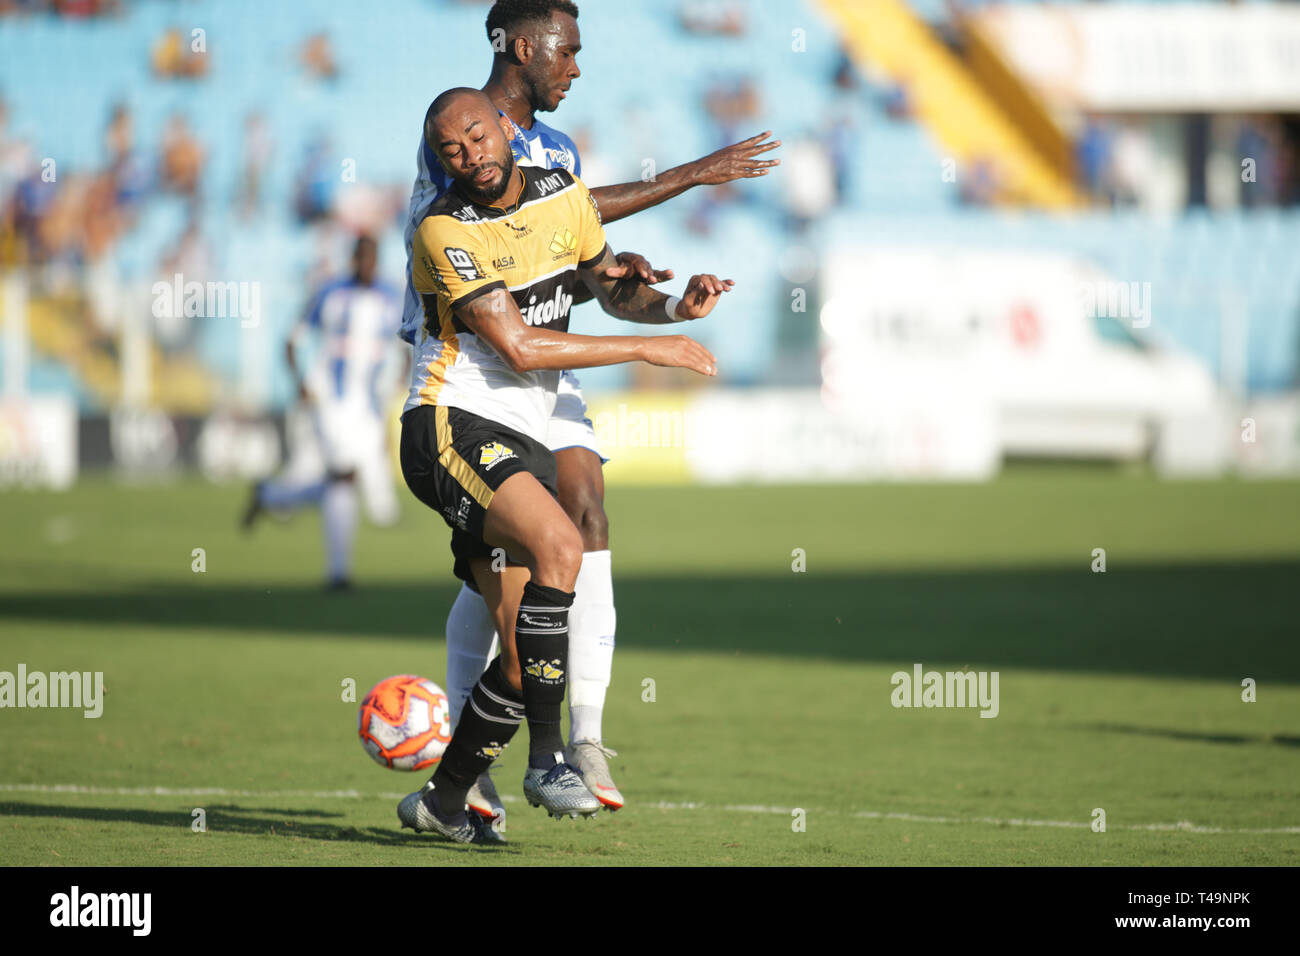 Florianopolis, Brazil. 14th Apr, 2019. SC - Florianopolis - 04/14/2019 - Catarinense 2019, Ava x Crici ma - Igor Fernandes of the Avai dispute bid with Wesley of Criciuma during match in the Stadium Ressacada by the State Championship 2019 Photo: Guilherme Hahn/AGIF Credit: AGIF/Alamy Live News Stock Photo